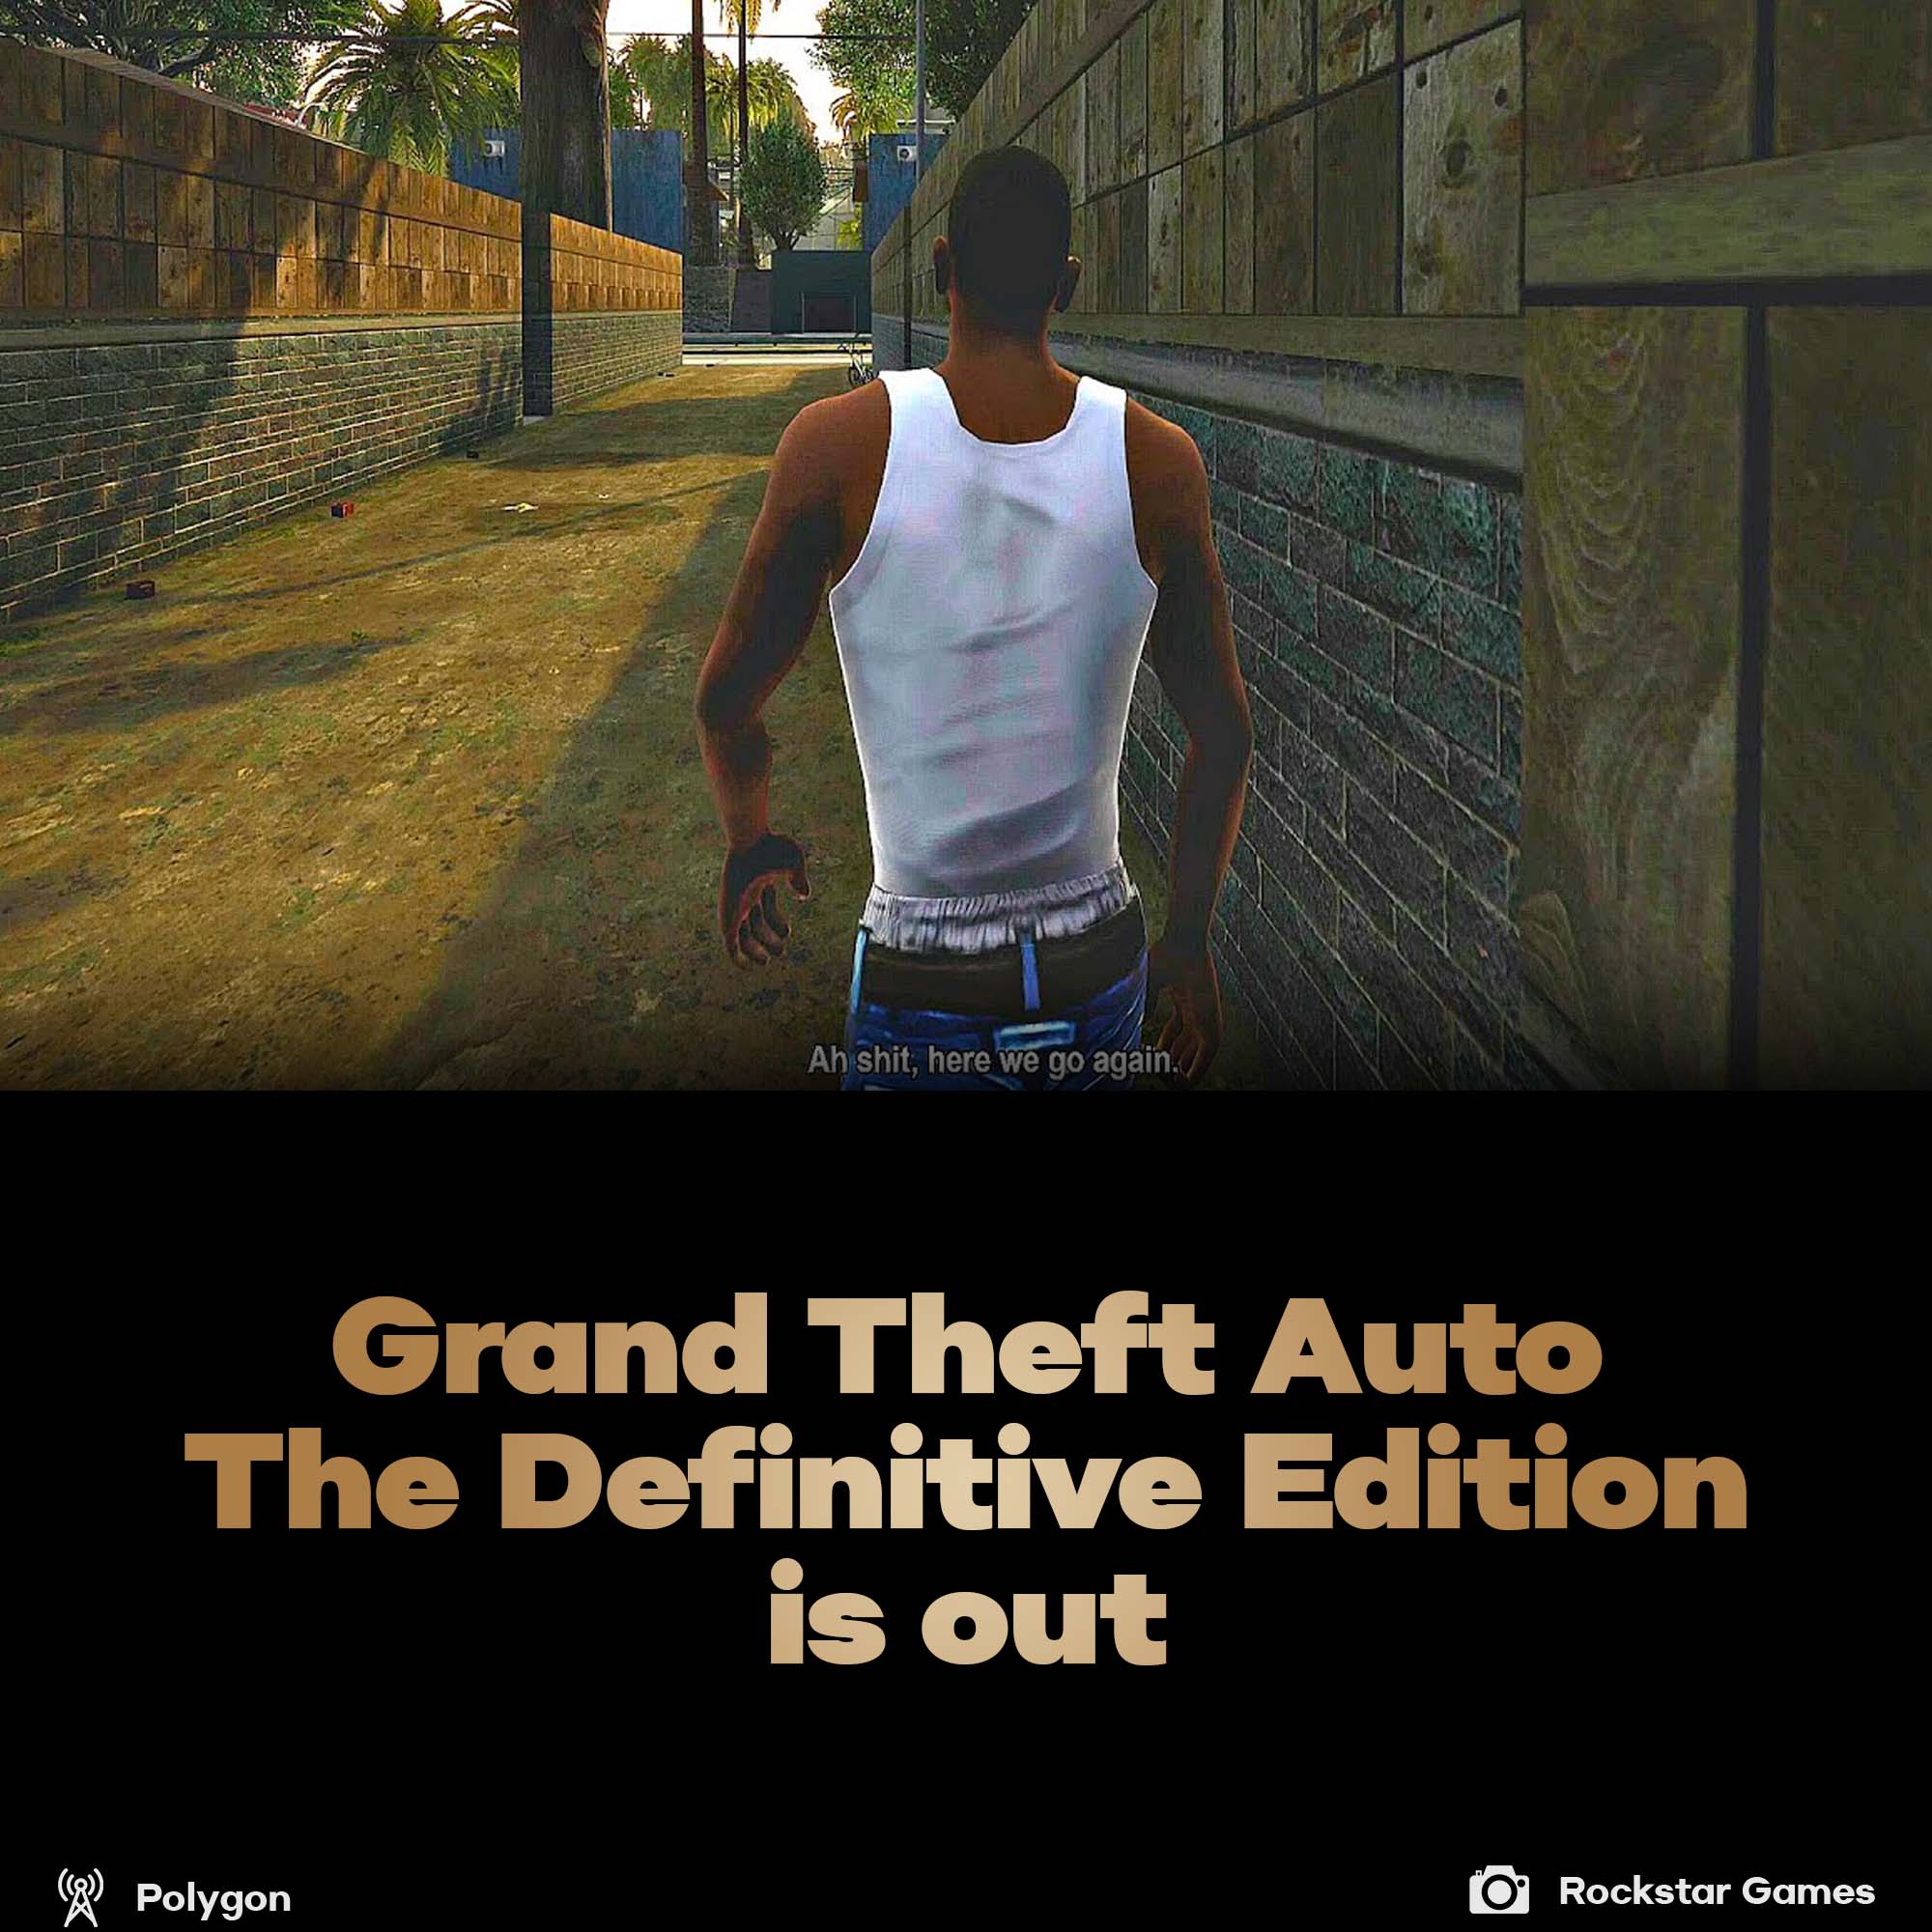 Grand Theft Auto: The Trilogy: The Definitive Edition arrived